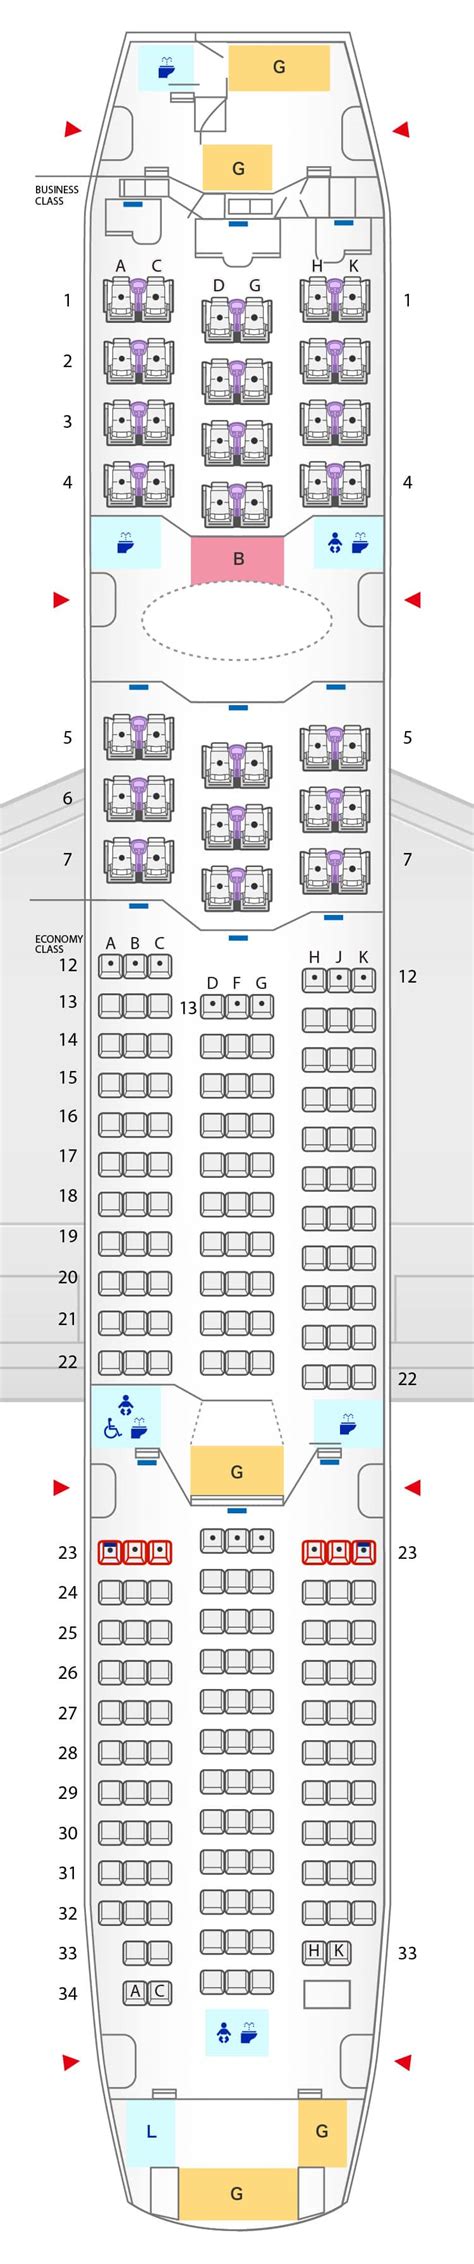 Boeing 787 Dreamliner Seating Plan Tui – Two Birds Home